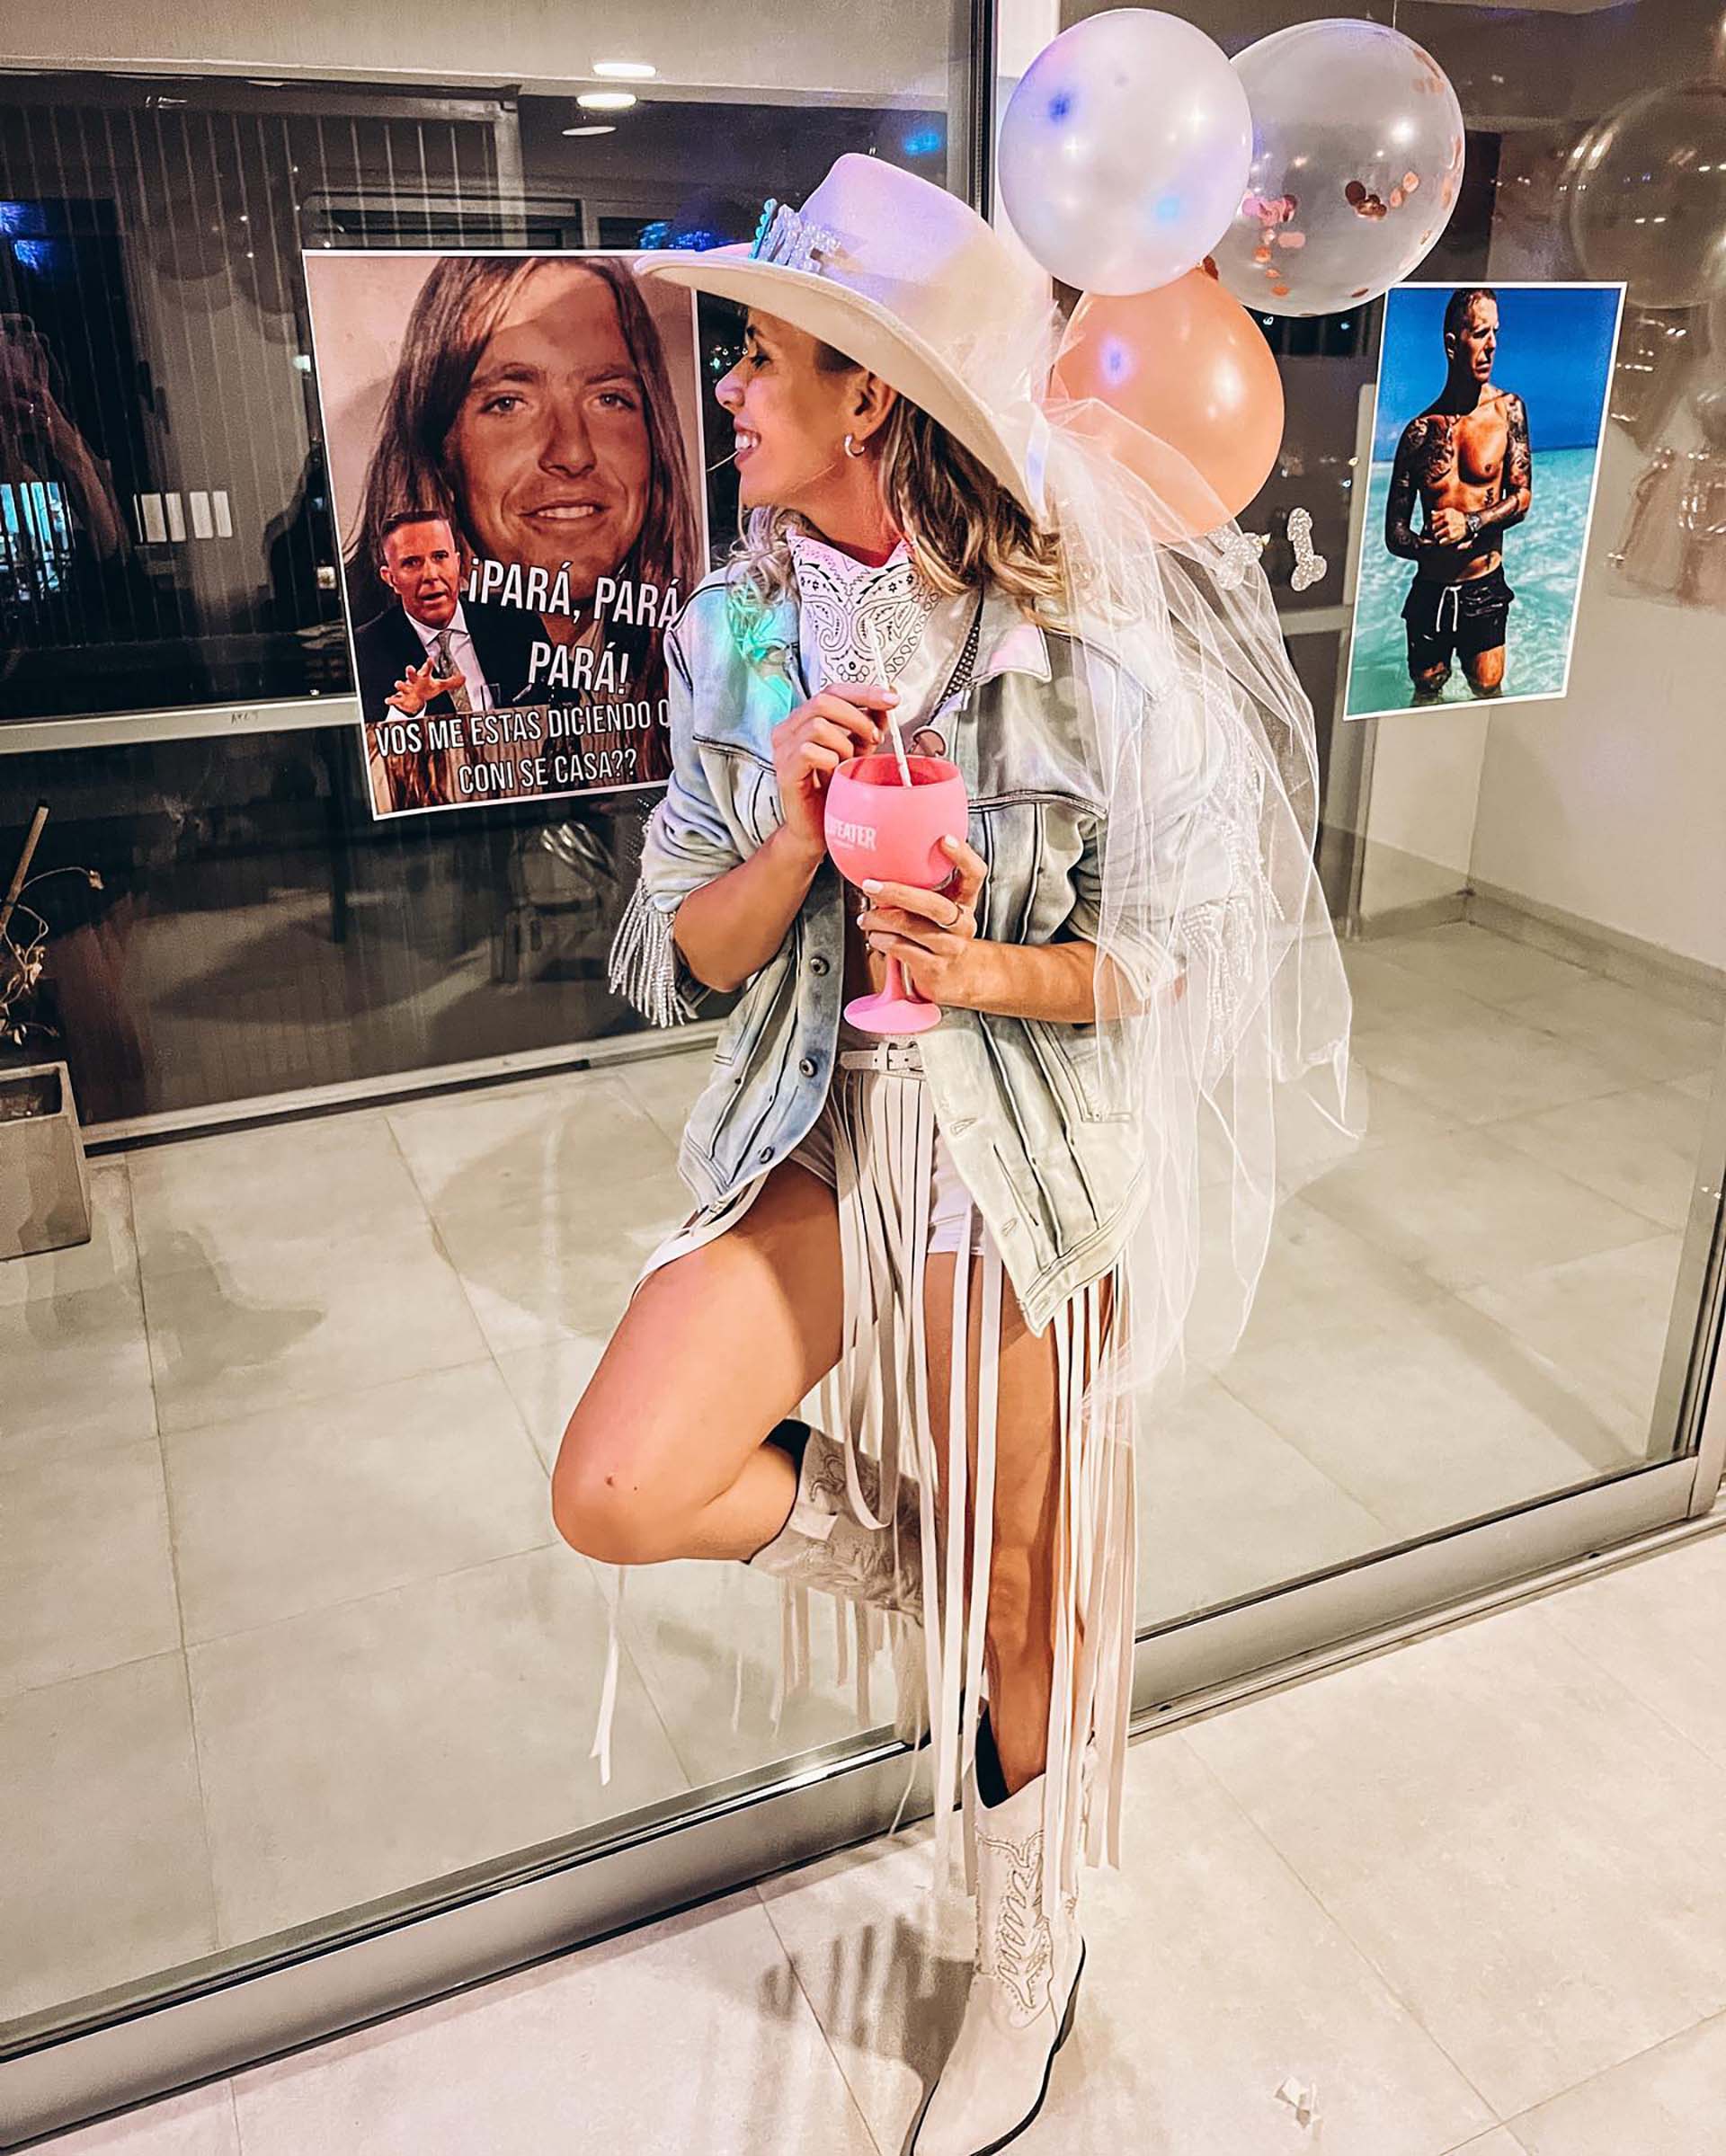 Connie Mosqueira And Her Bachelorette Party Decorations With A Nod To Her Future Husband Alejandro Fantino (Photo: Instagram)